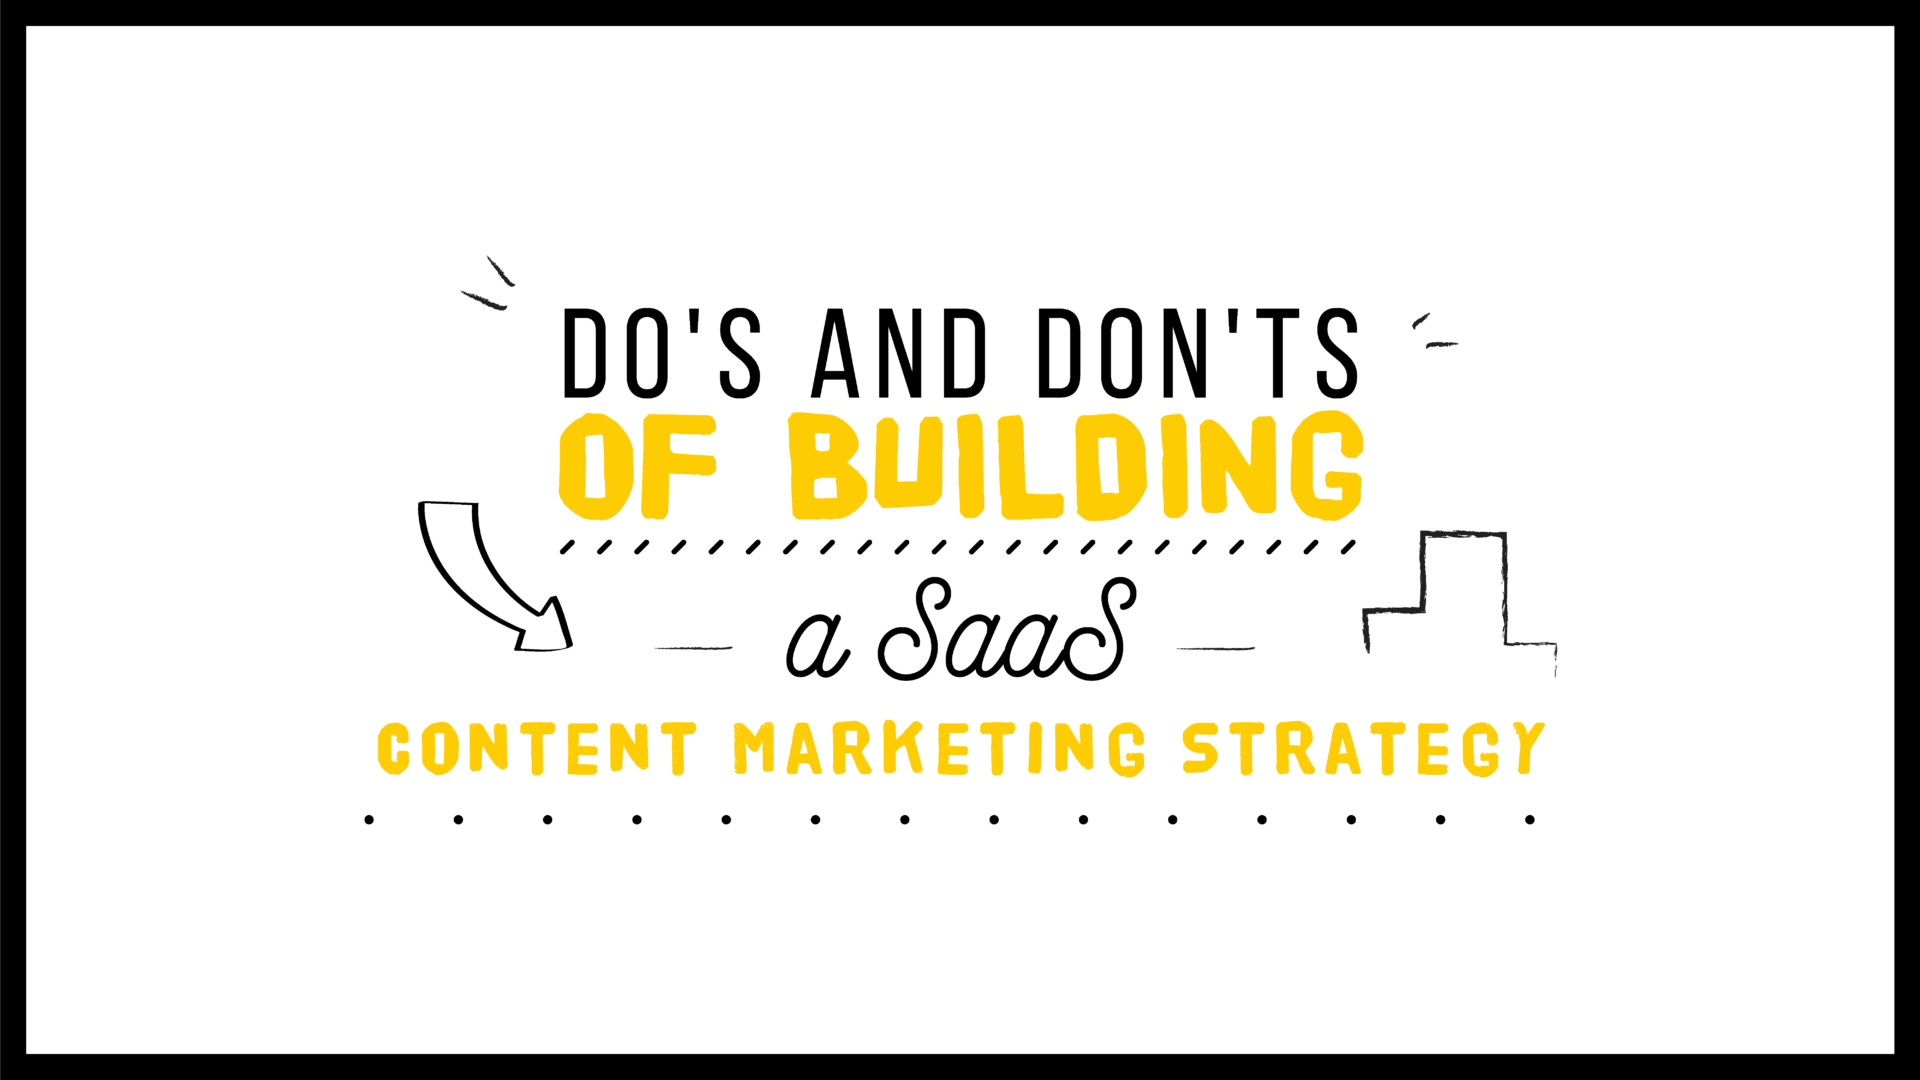 Do's and Don'ts of Building a SaaS Content Marketing Strategy